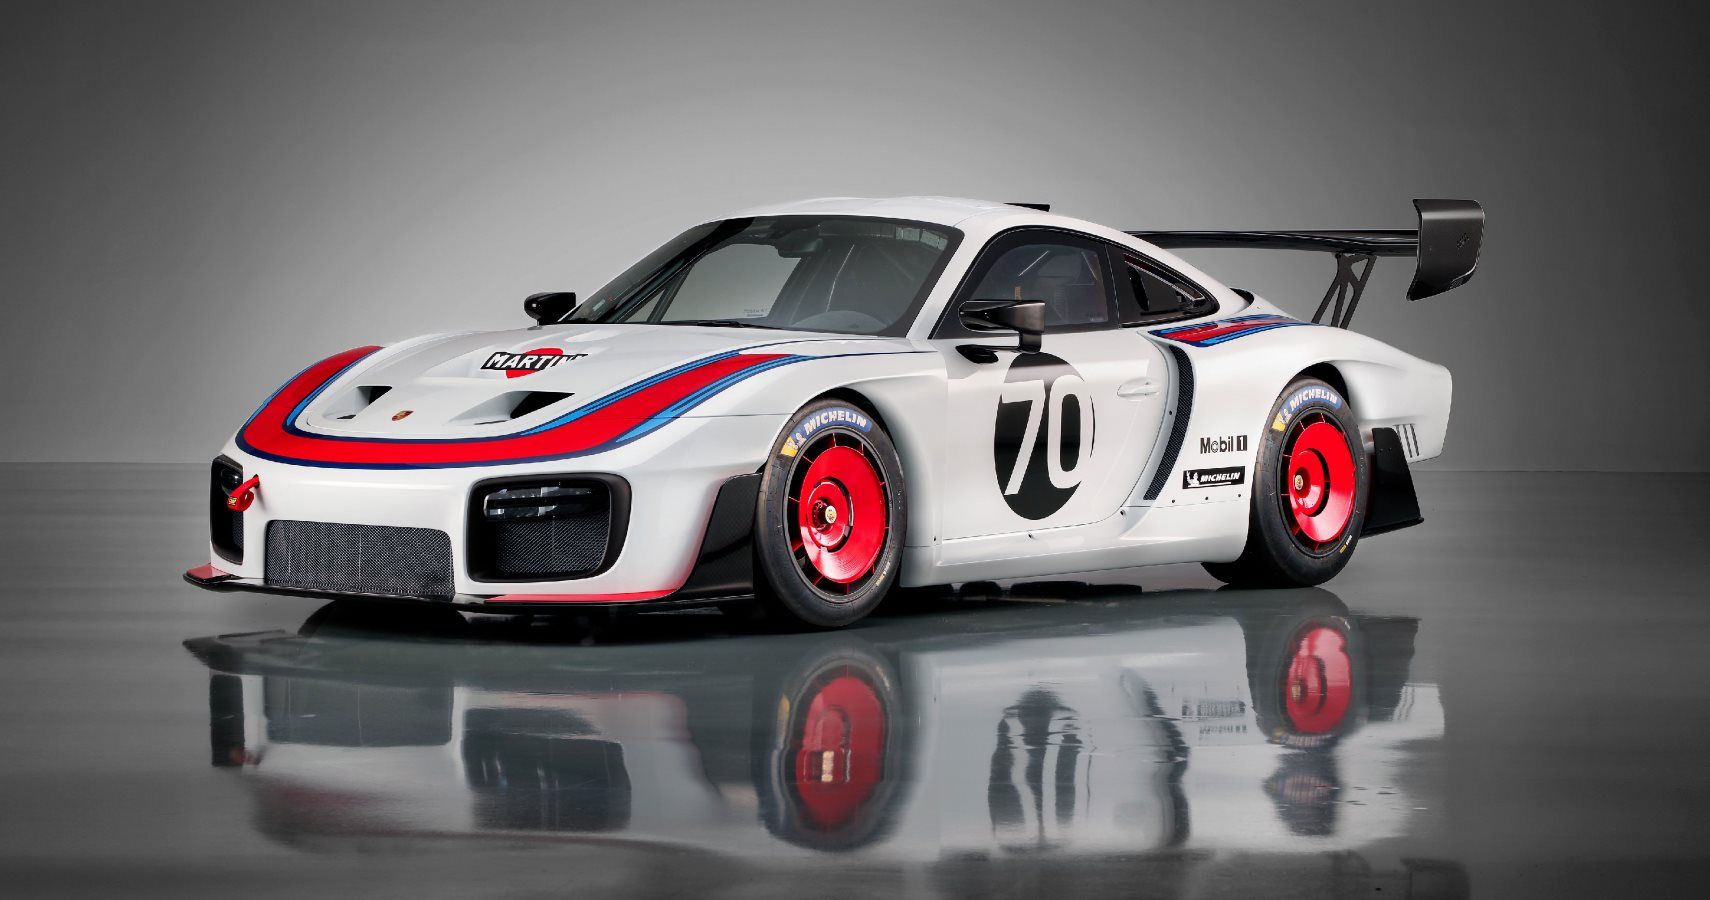 Porsche Makes Extremely Limited 935 With Serious Power